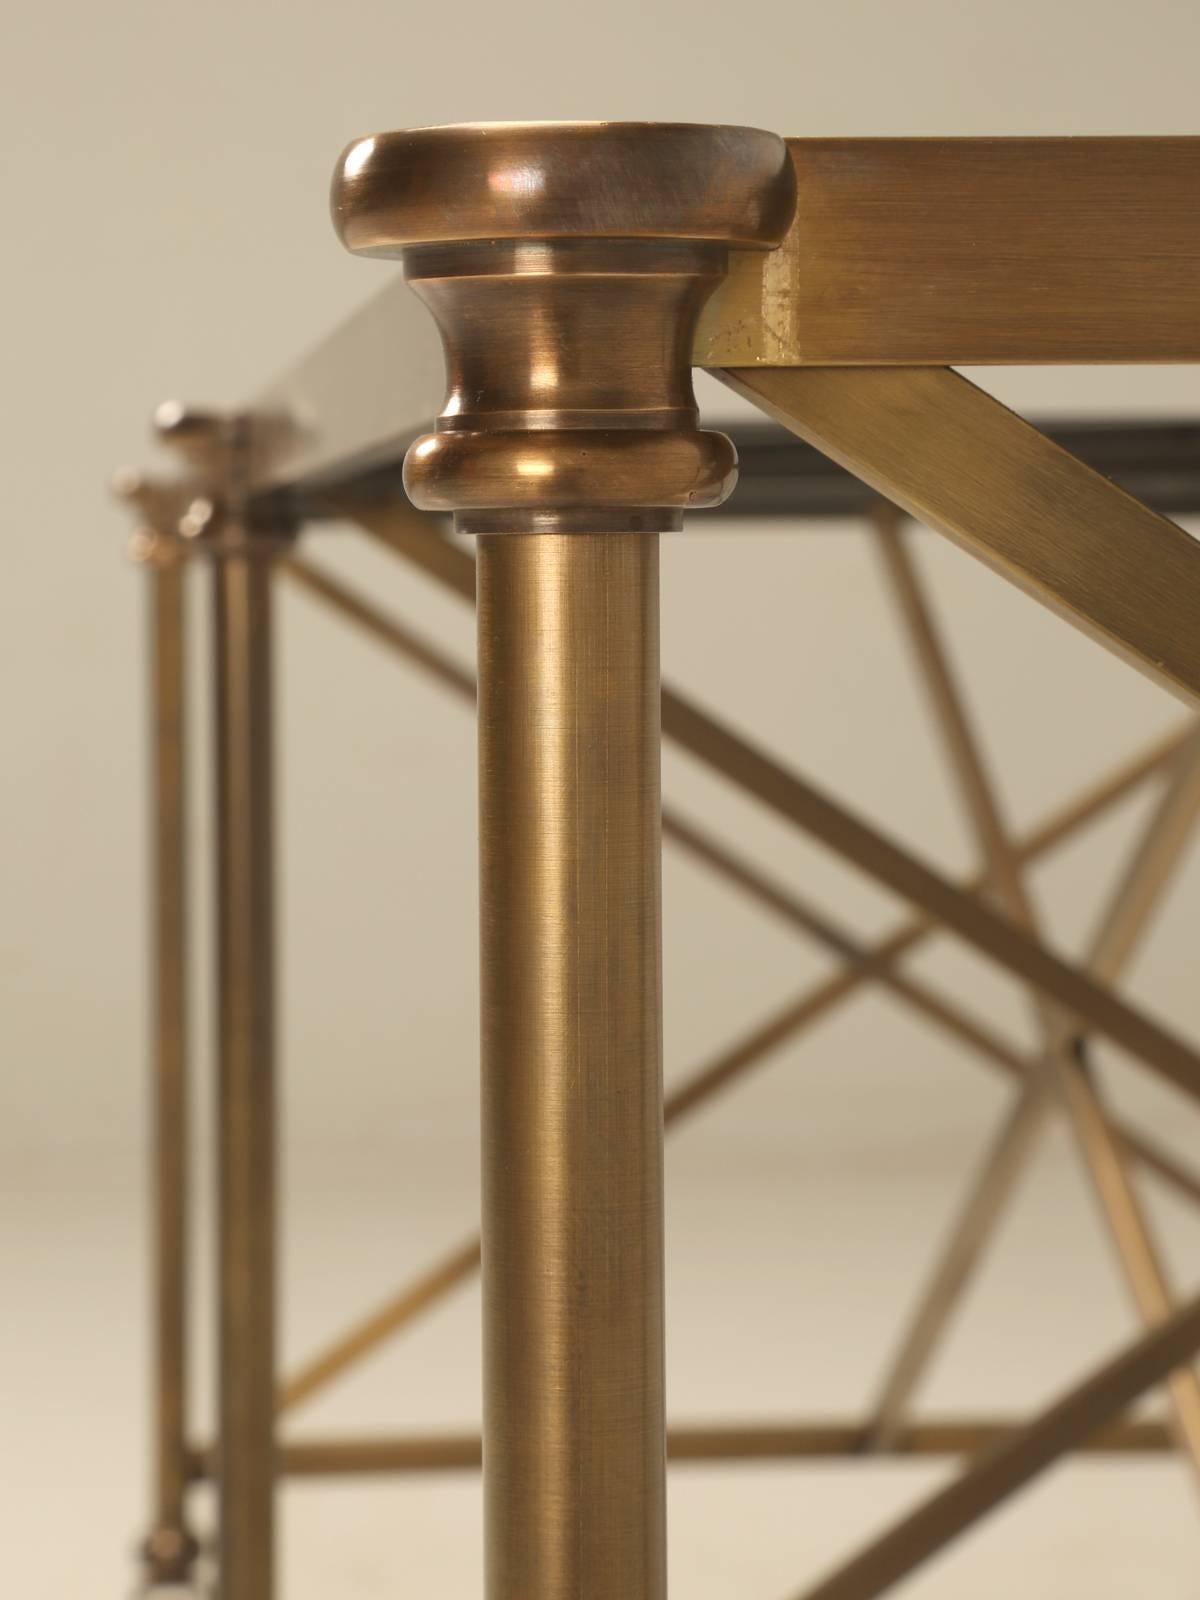 American French Inspired Industrial Style Brass Kitchen Island Made to Order For Sale